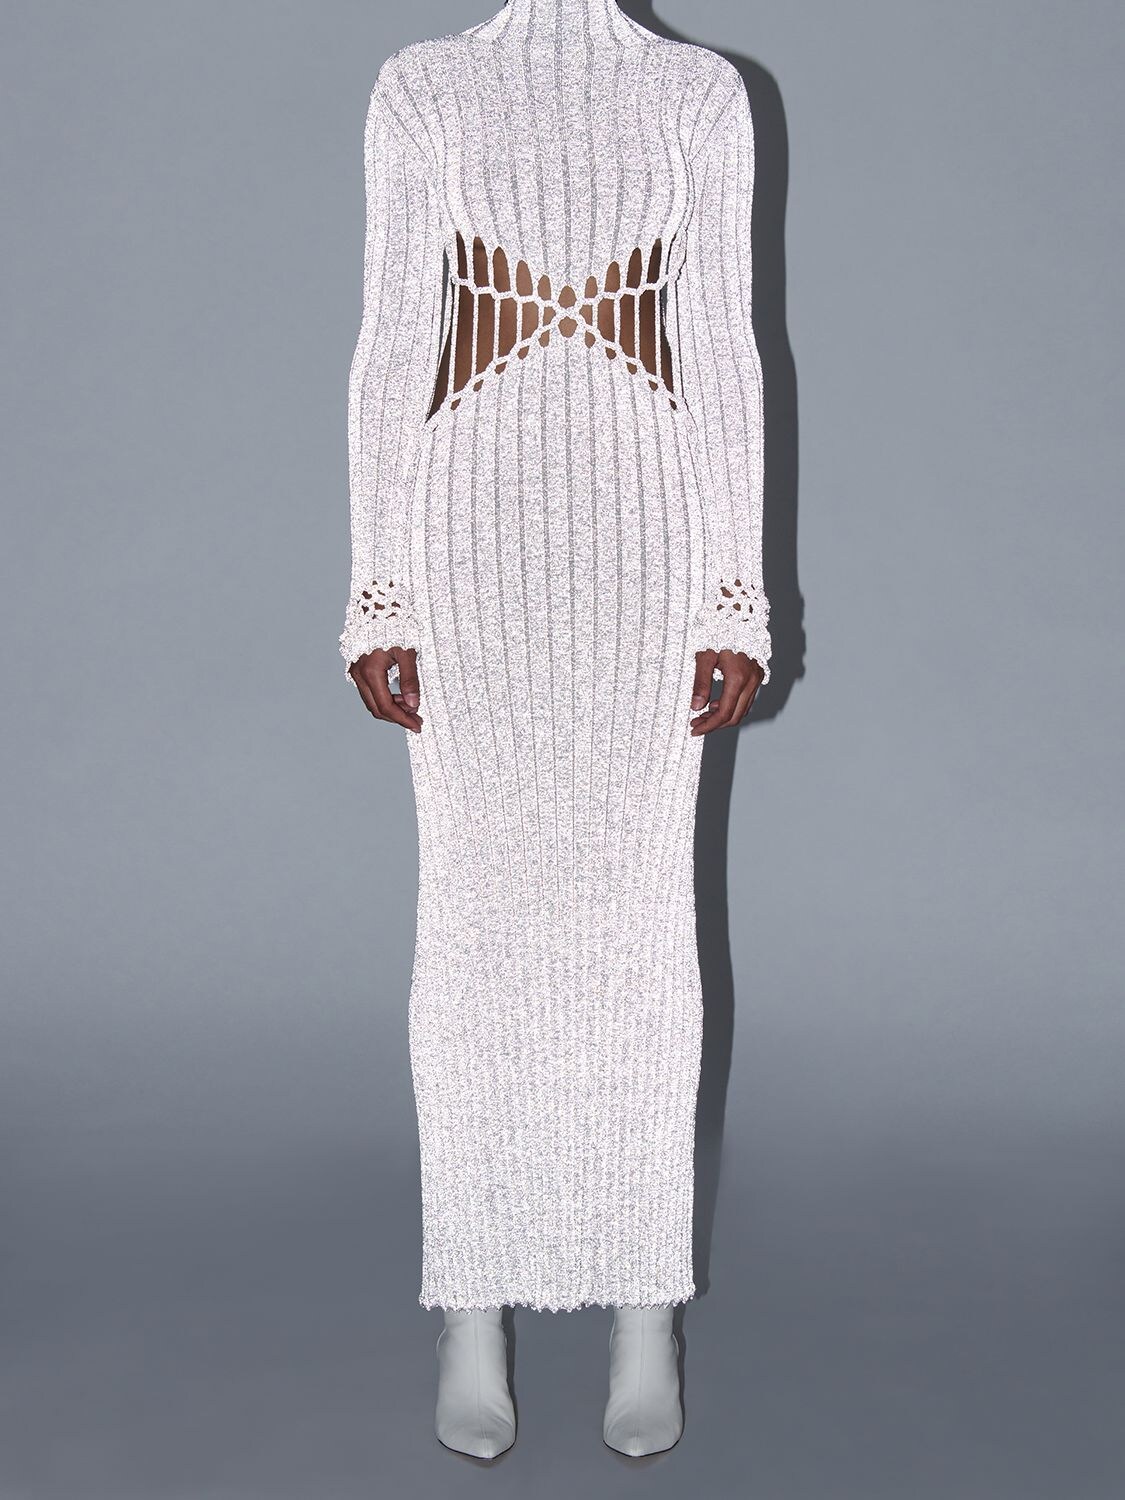 Dion Lee Light Reflective Braided Cuff Cutout Long Sleeve Sweater Dress In  Silver,grey | ModeSens